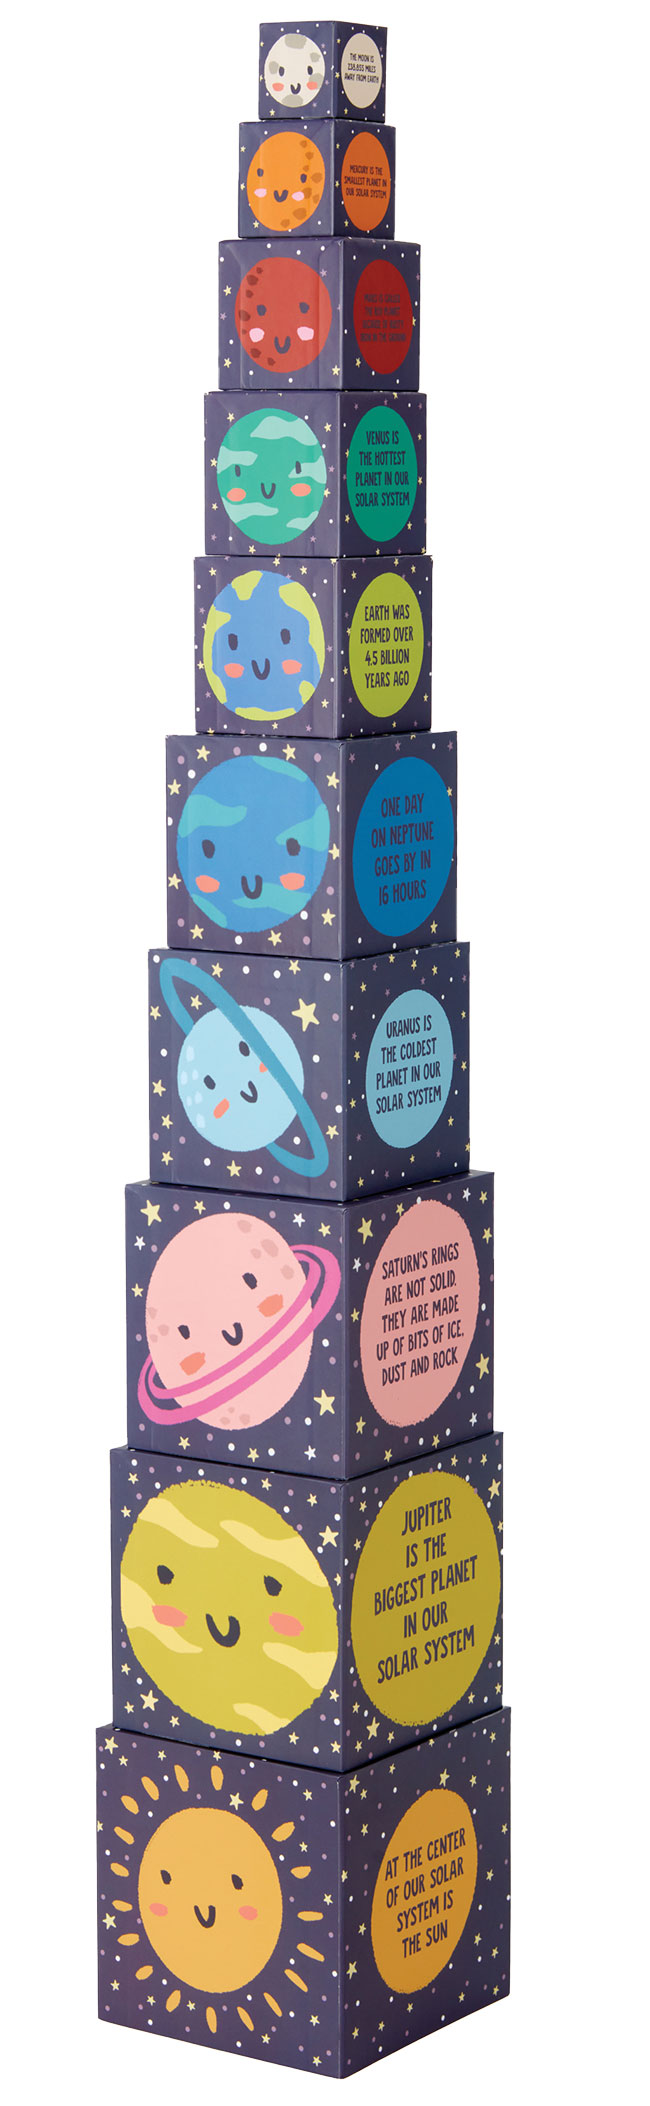 Outer Space Nesting Blocks. C·R· Gibson.